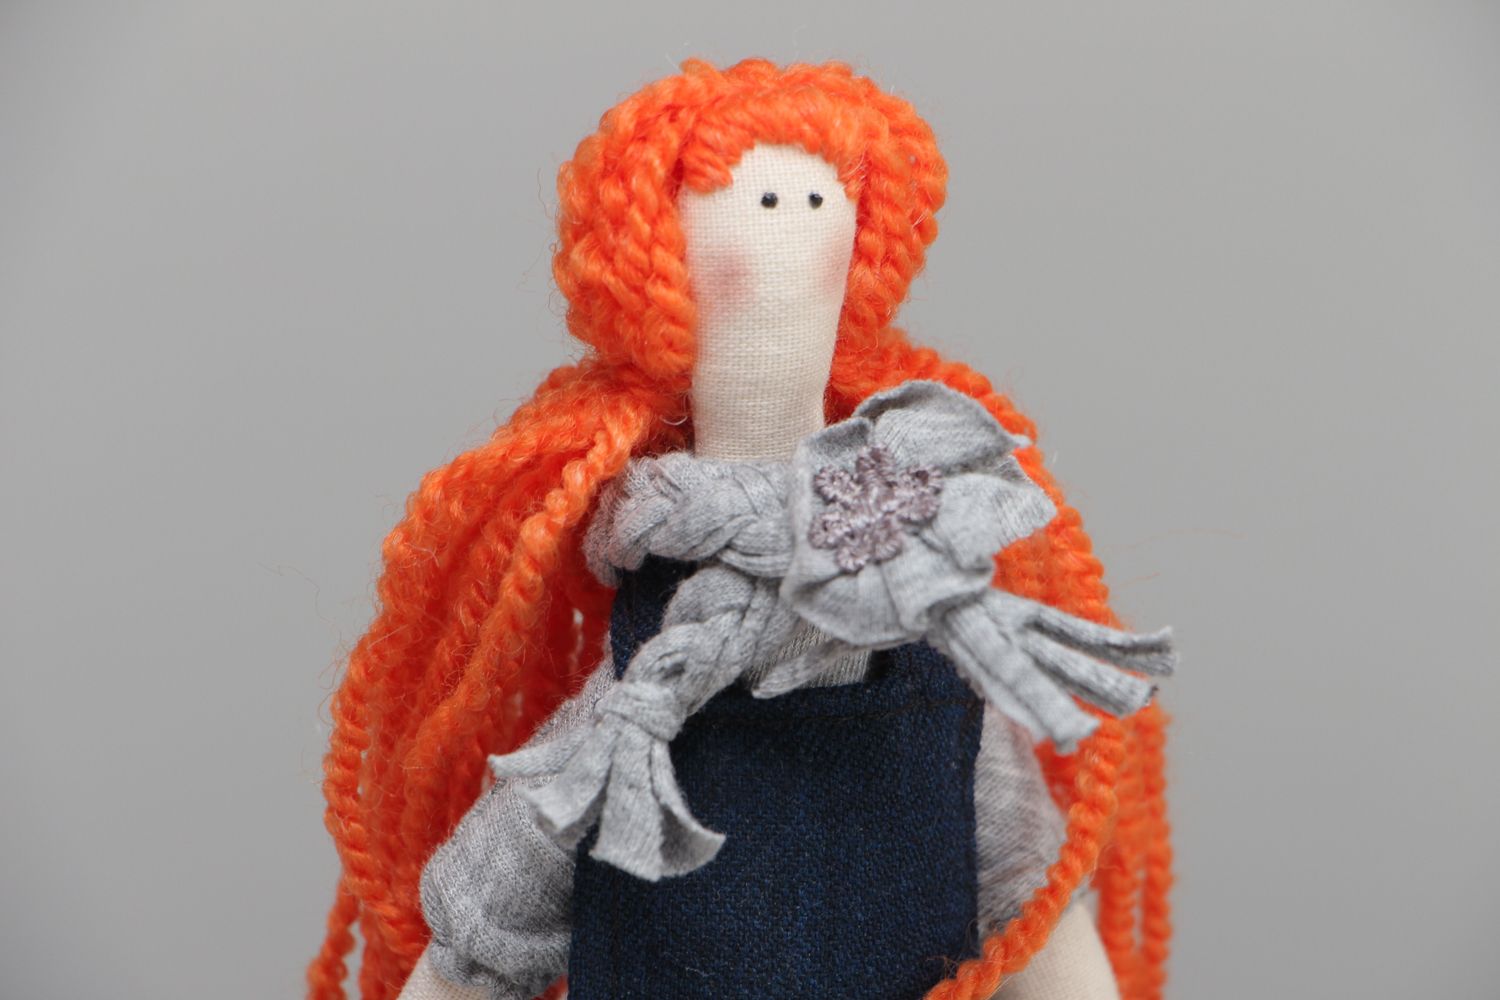 Fabric doll with red hair photo 2